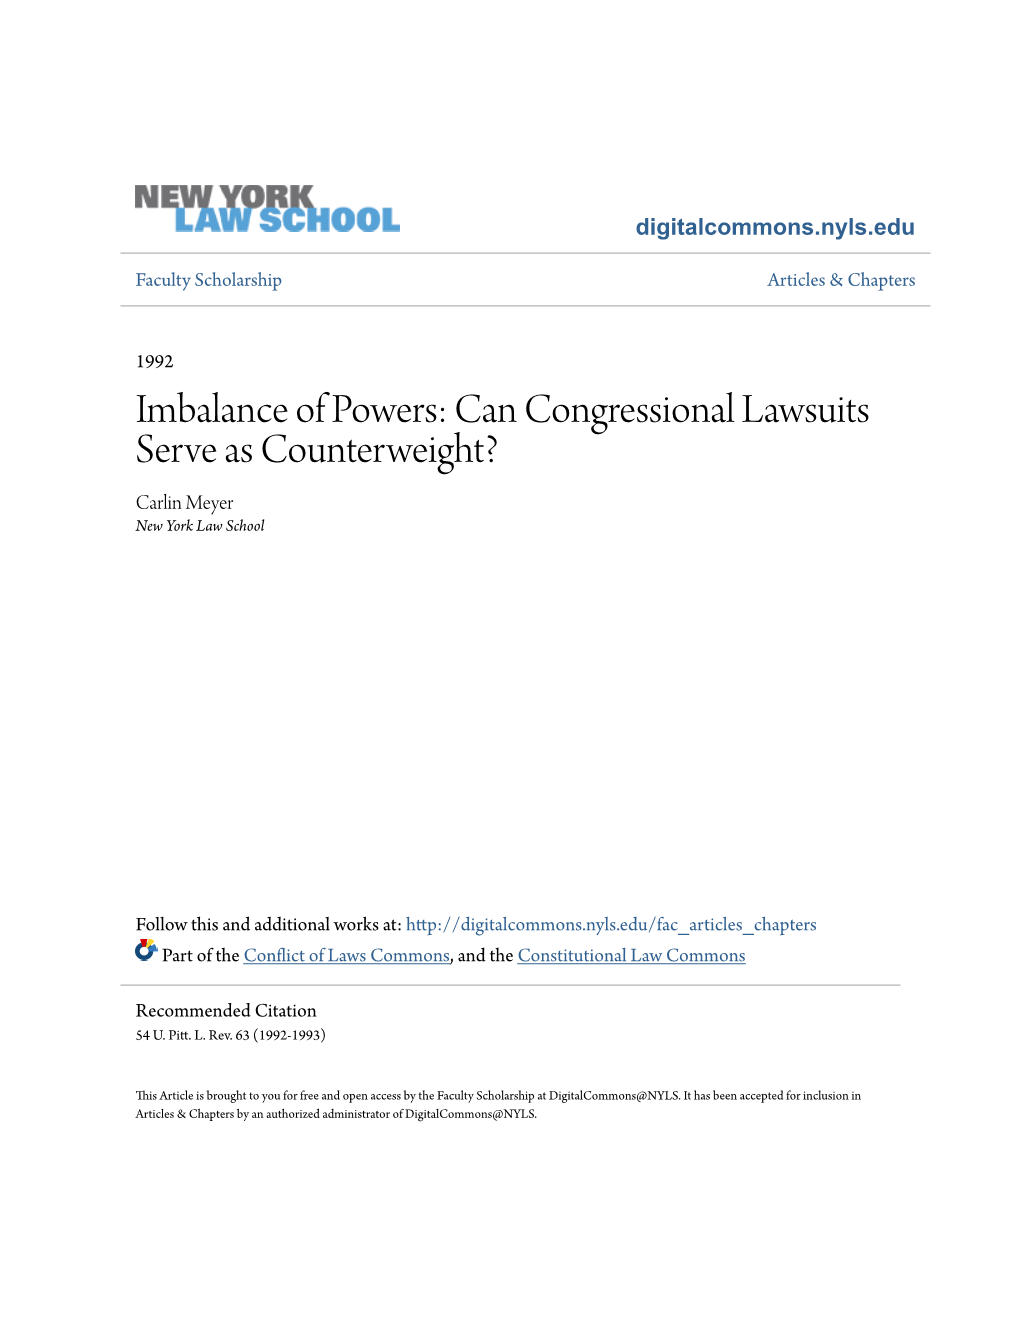 Imbalance of Powers: Can Congressional Lawsuits Serve As Counterweight? Carlin Meyer New York Law School